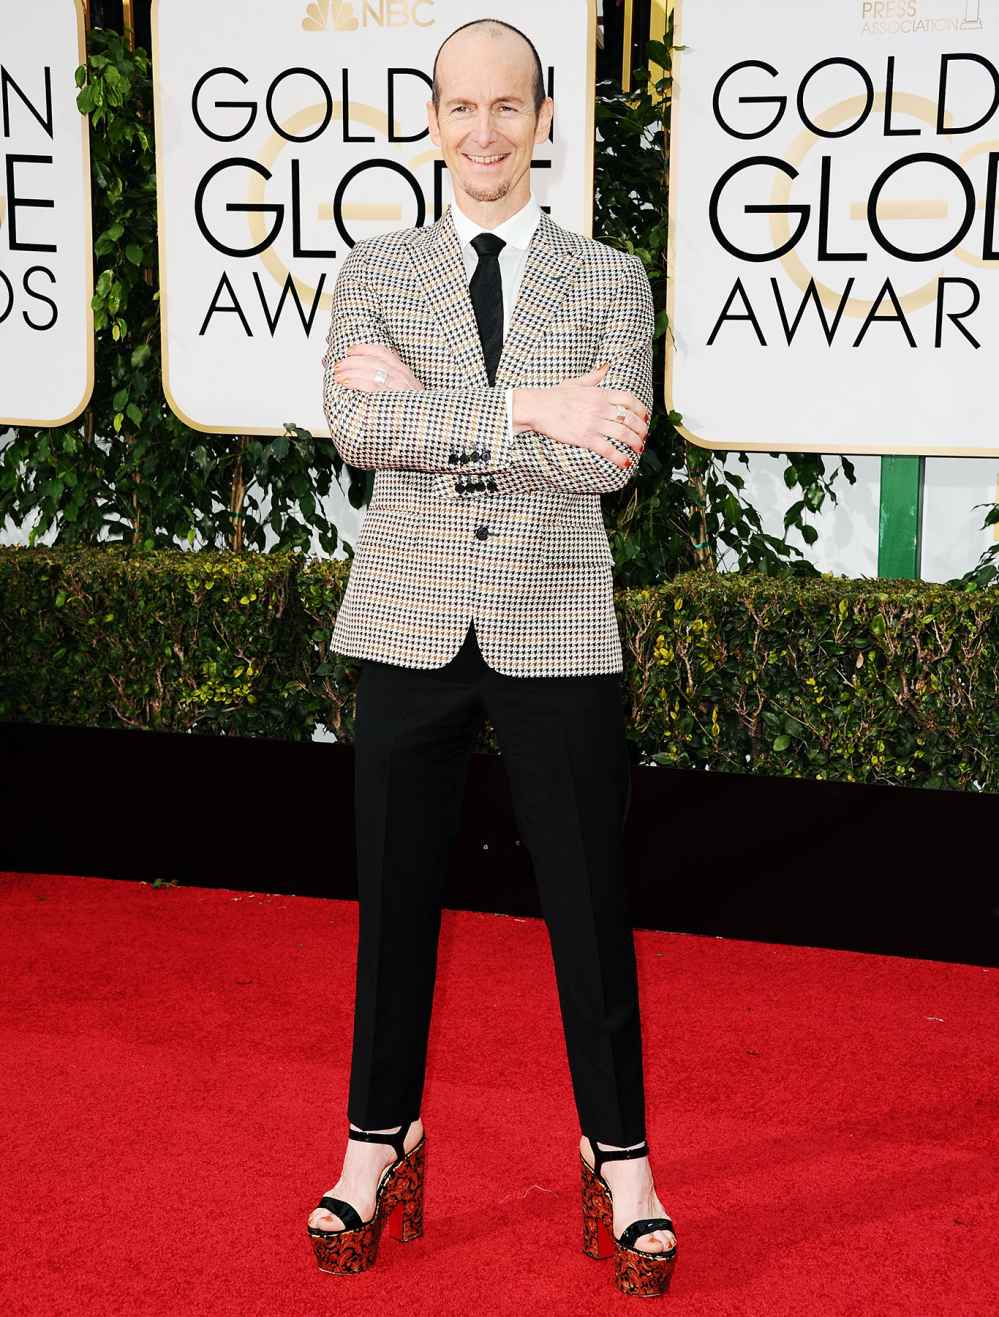 Denis O'Hare at the Golden Globes 2016.